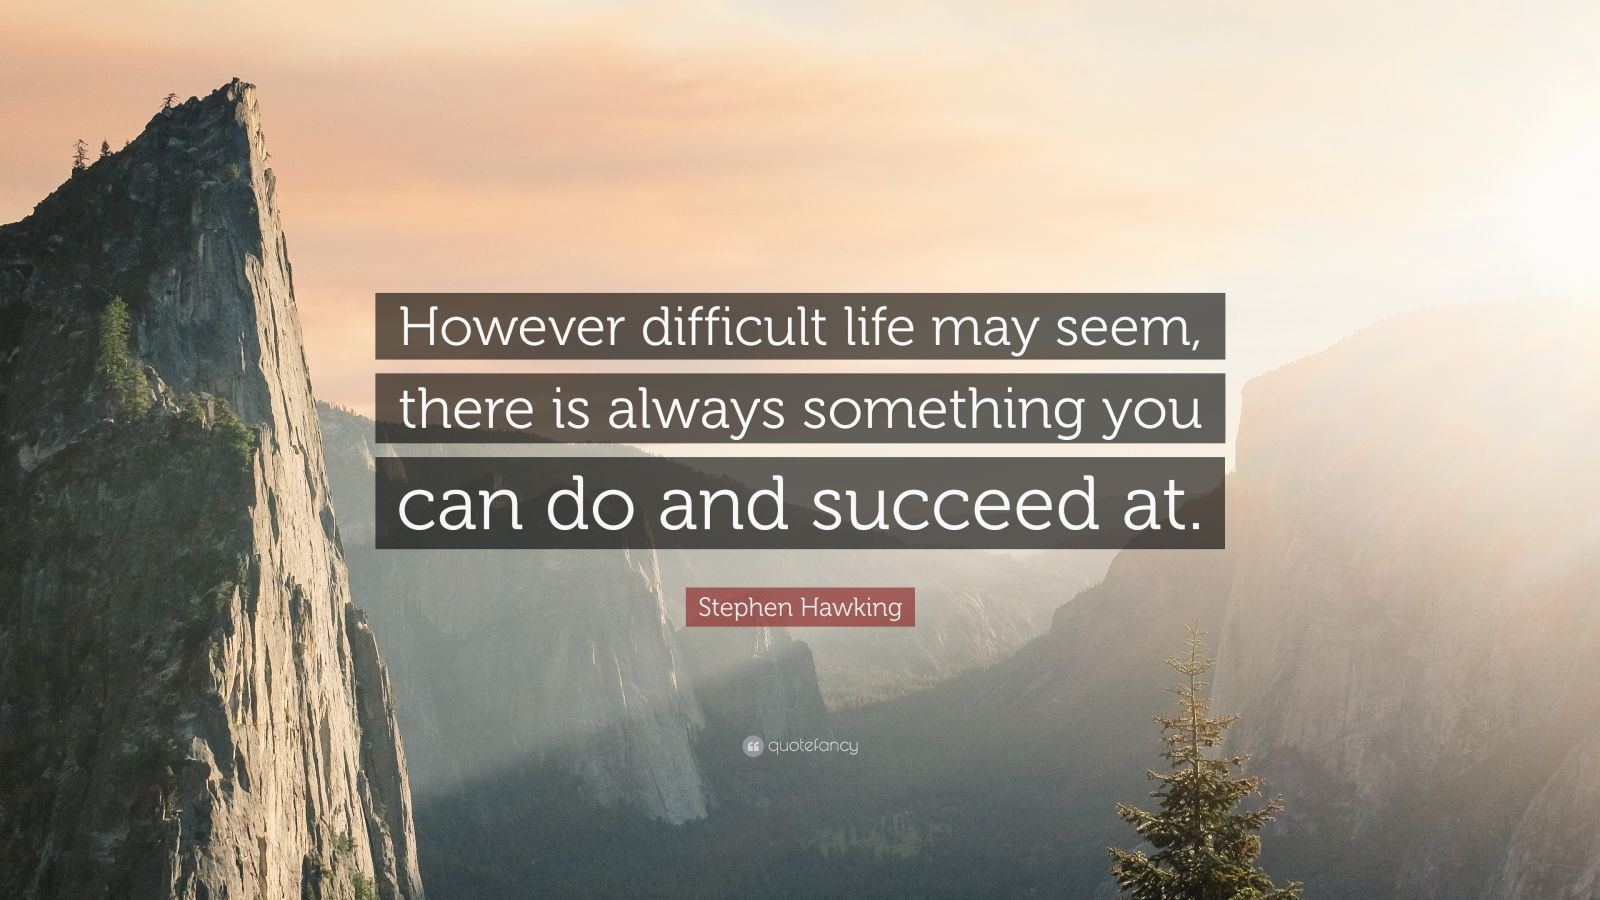 Stephen Hawking Quote: “However difficult life may seem, there is